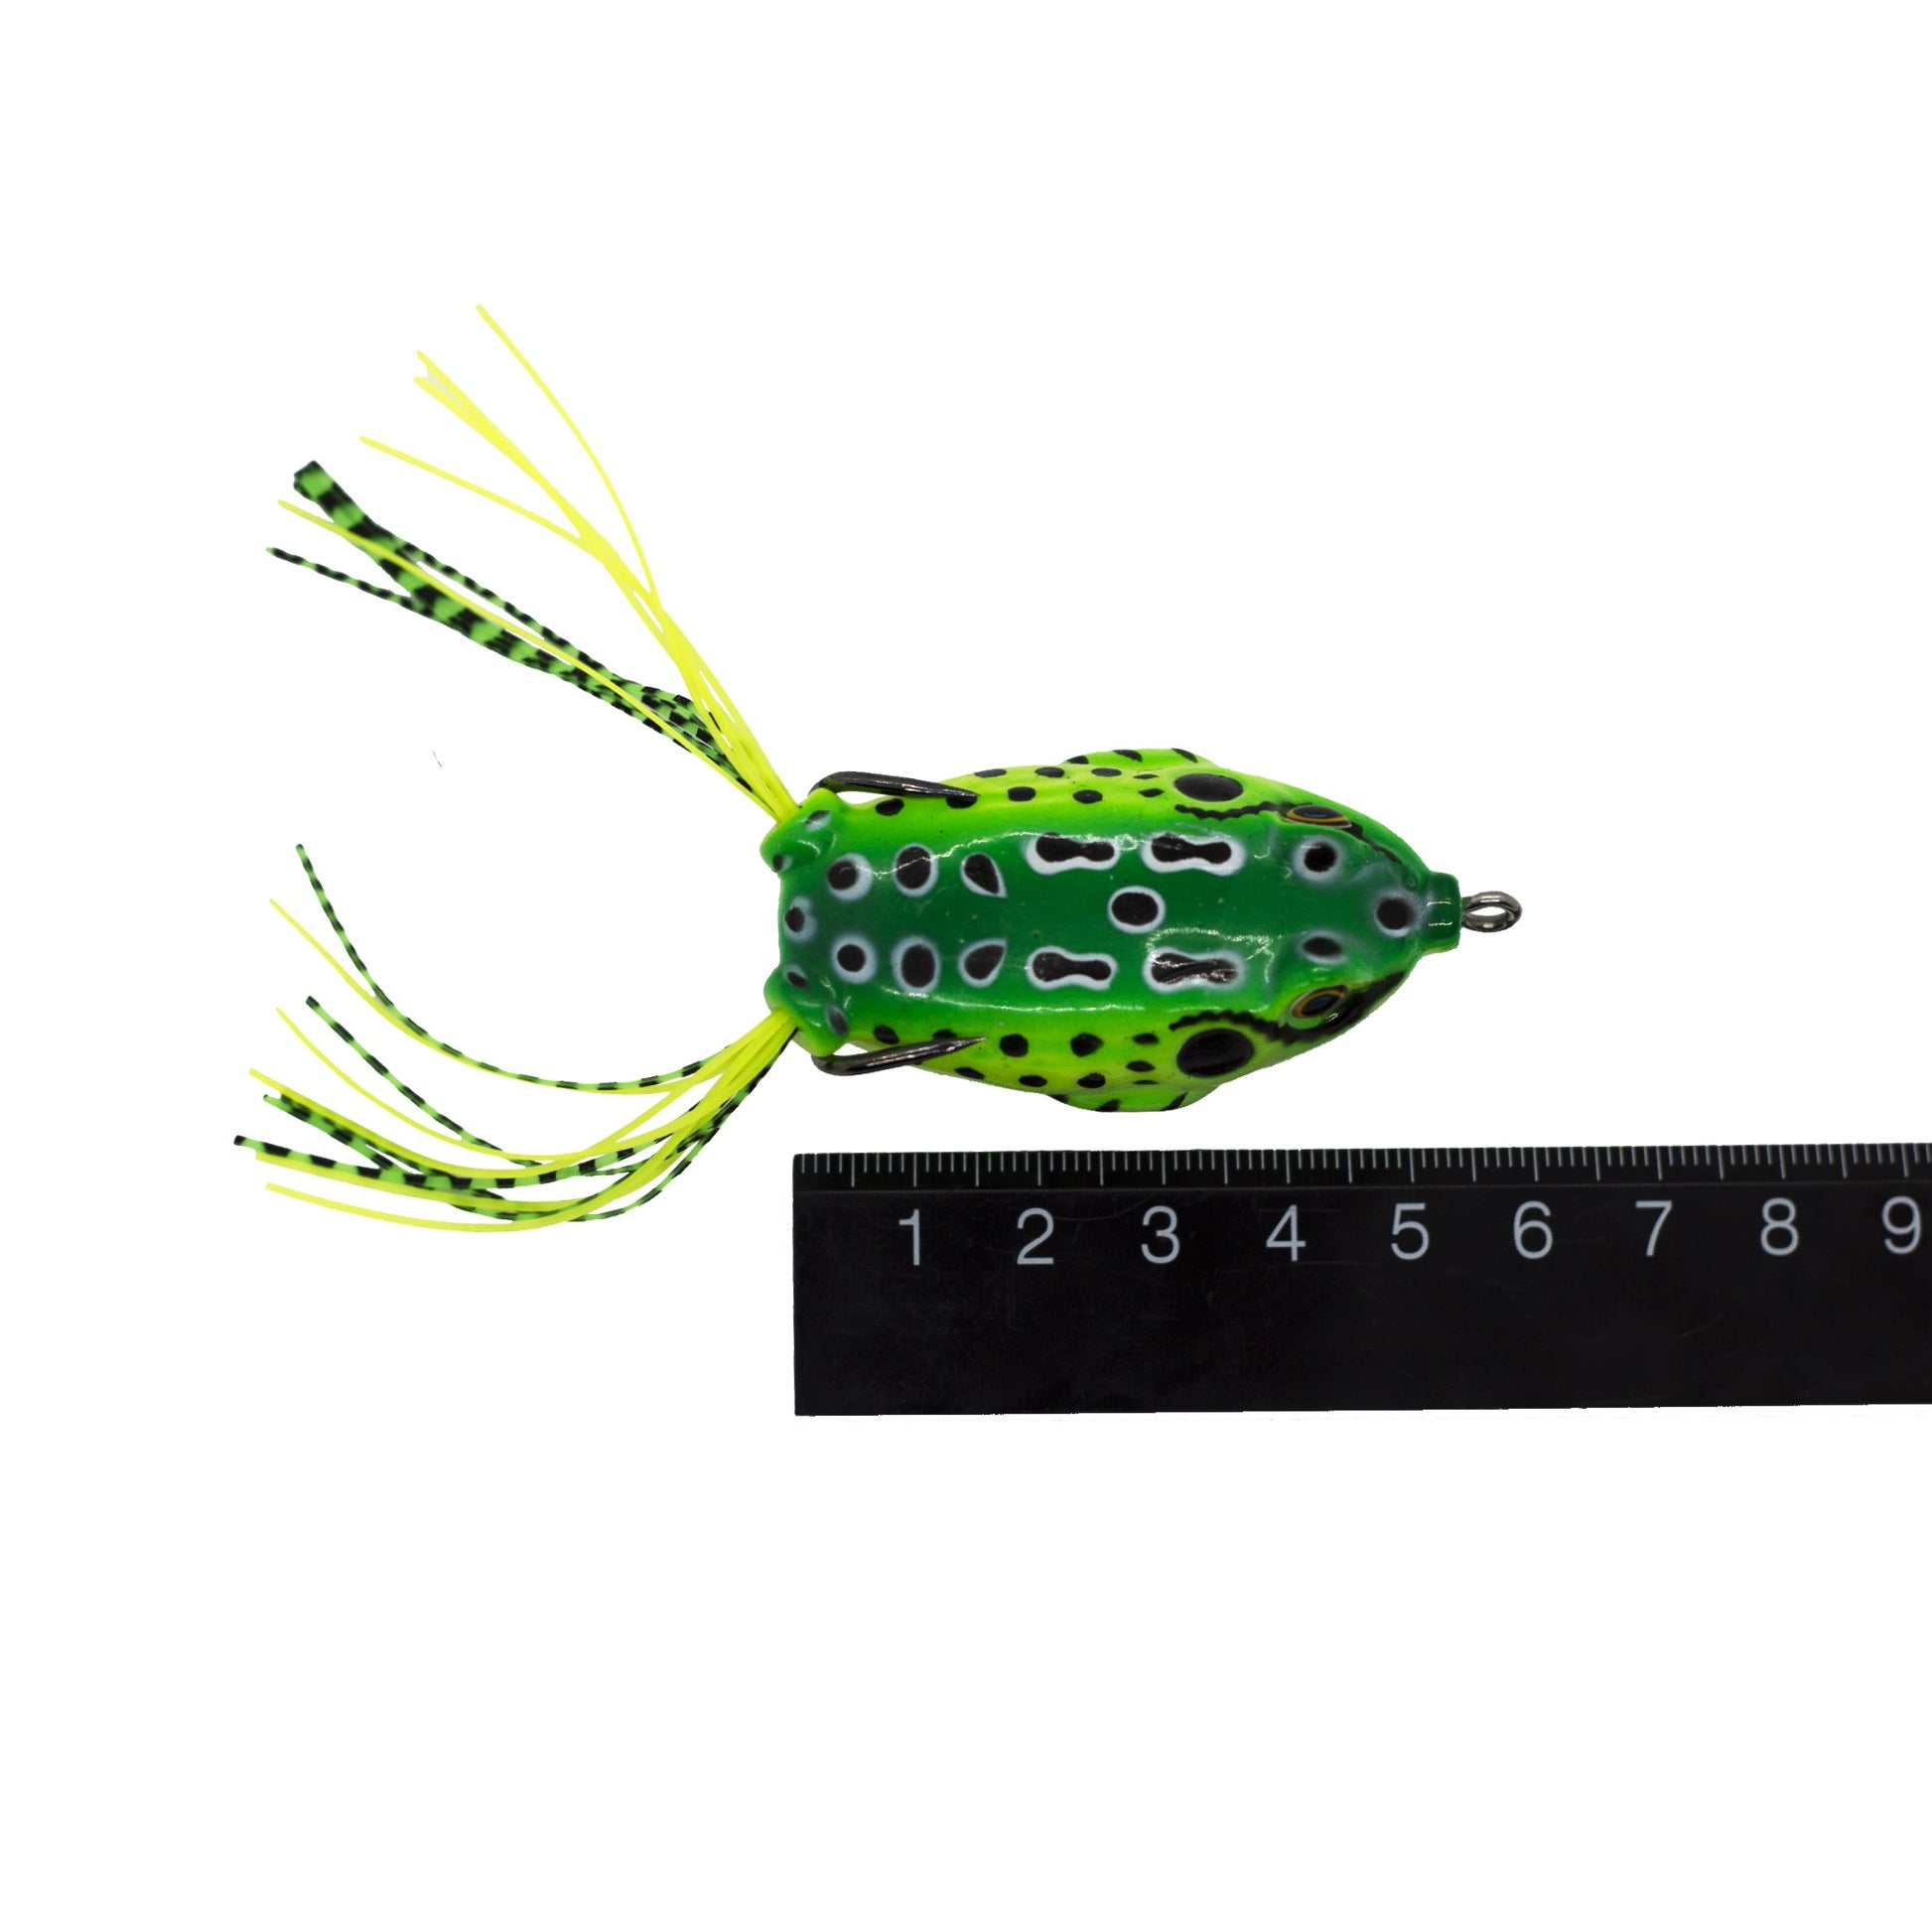 8 Piece Mixed Color Top Water Frogs – Fish Lure Tacklebox